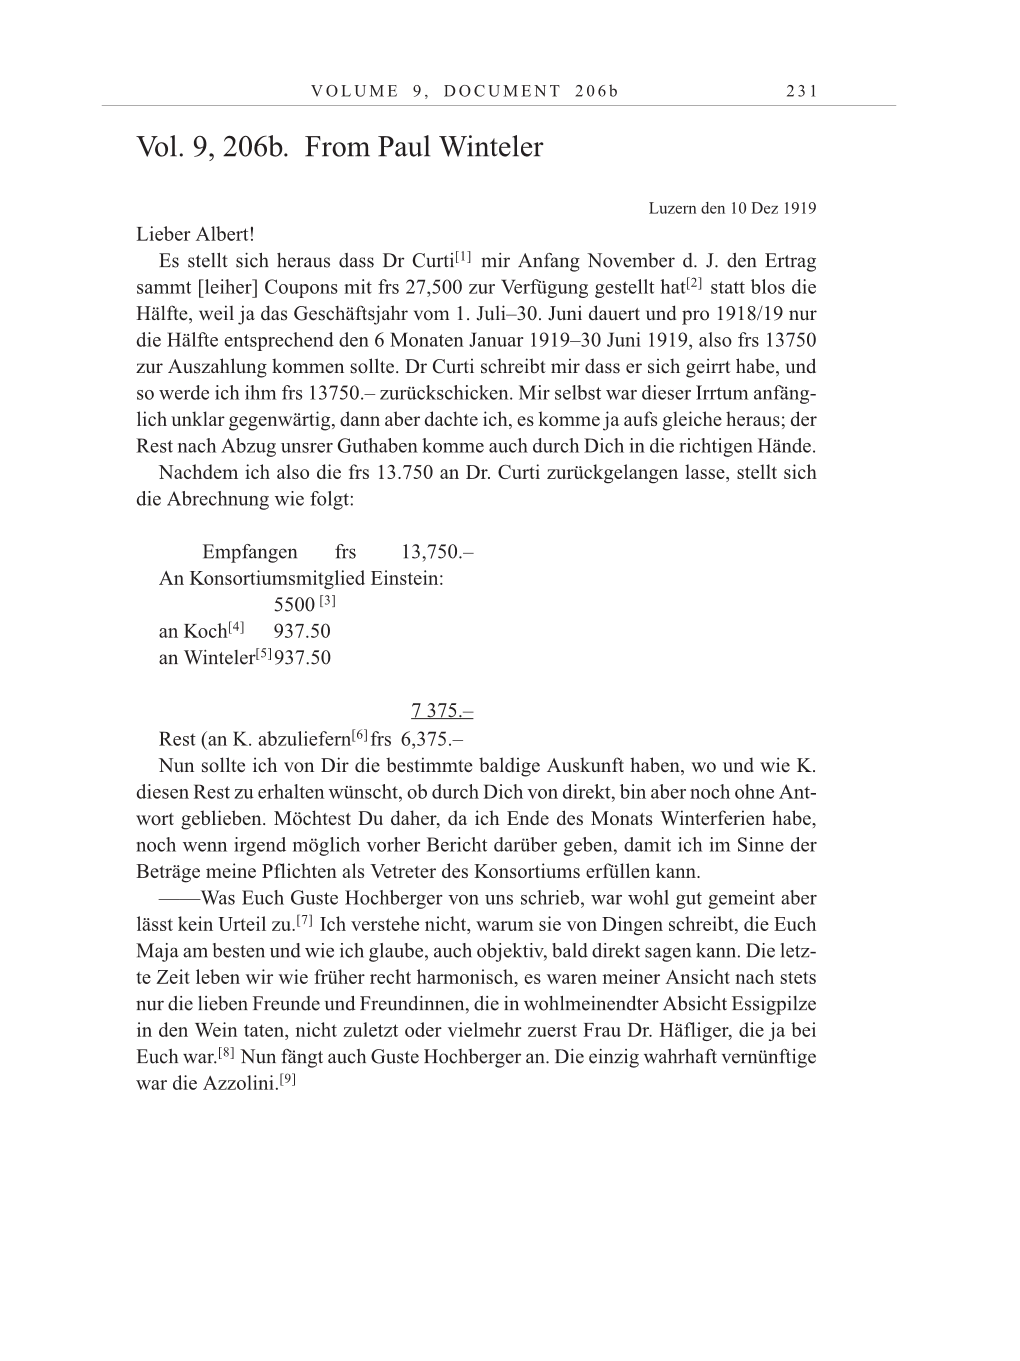 Volume 10: The Berlin Years: Correspondence May-December 1920 / Supplementary Correspondence 1909-1920 page 231